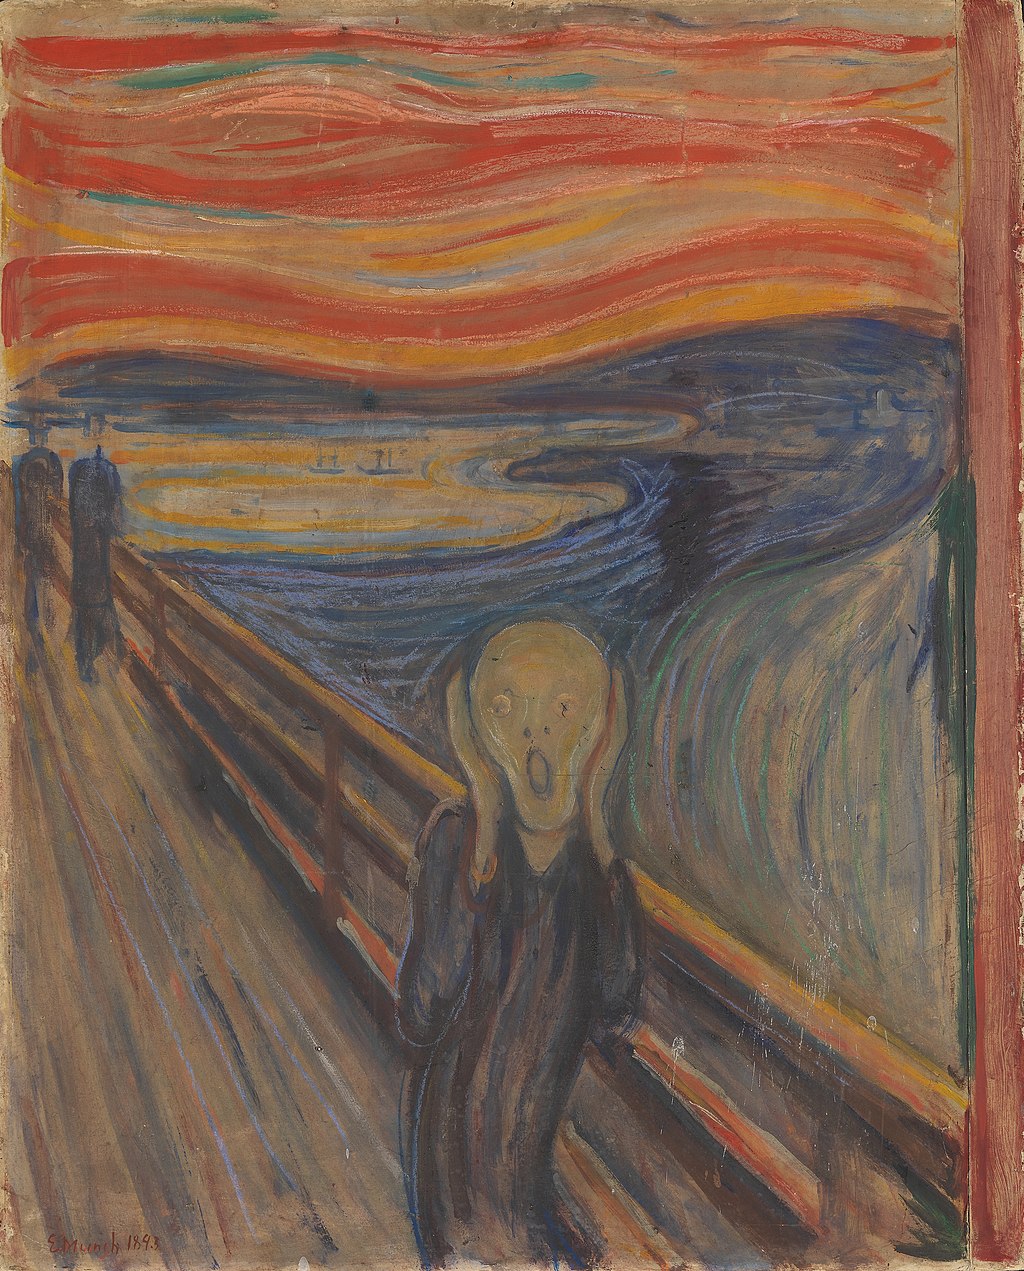 Edvard Munch, The Scream (1893) oil, tempera, pastel, and crayon on cardboard.